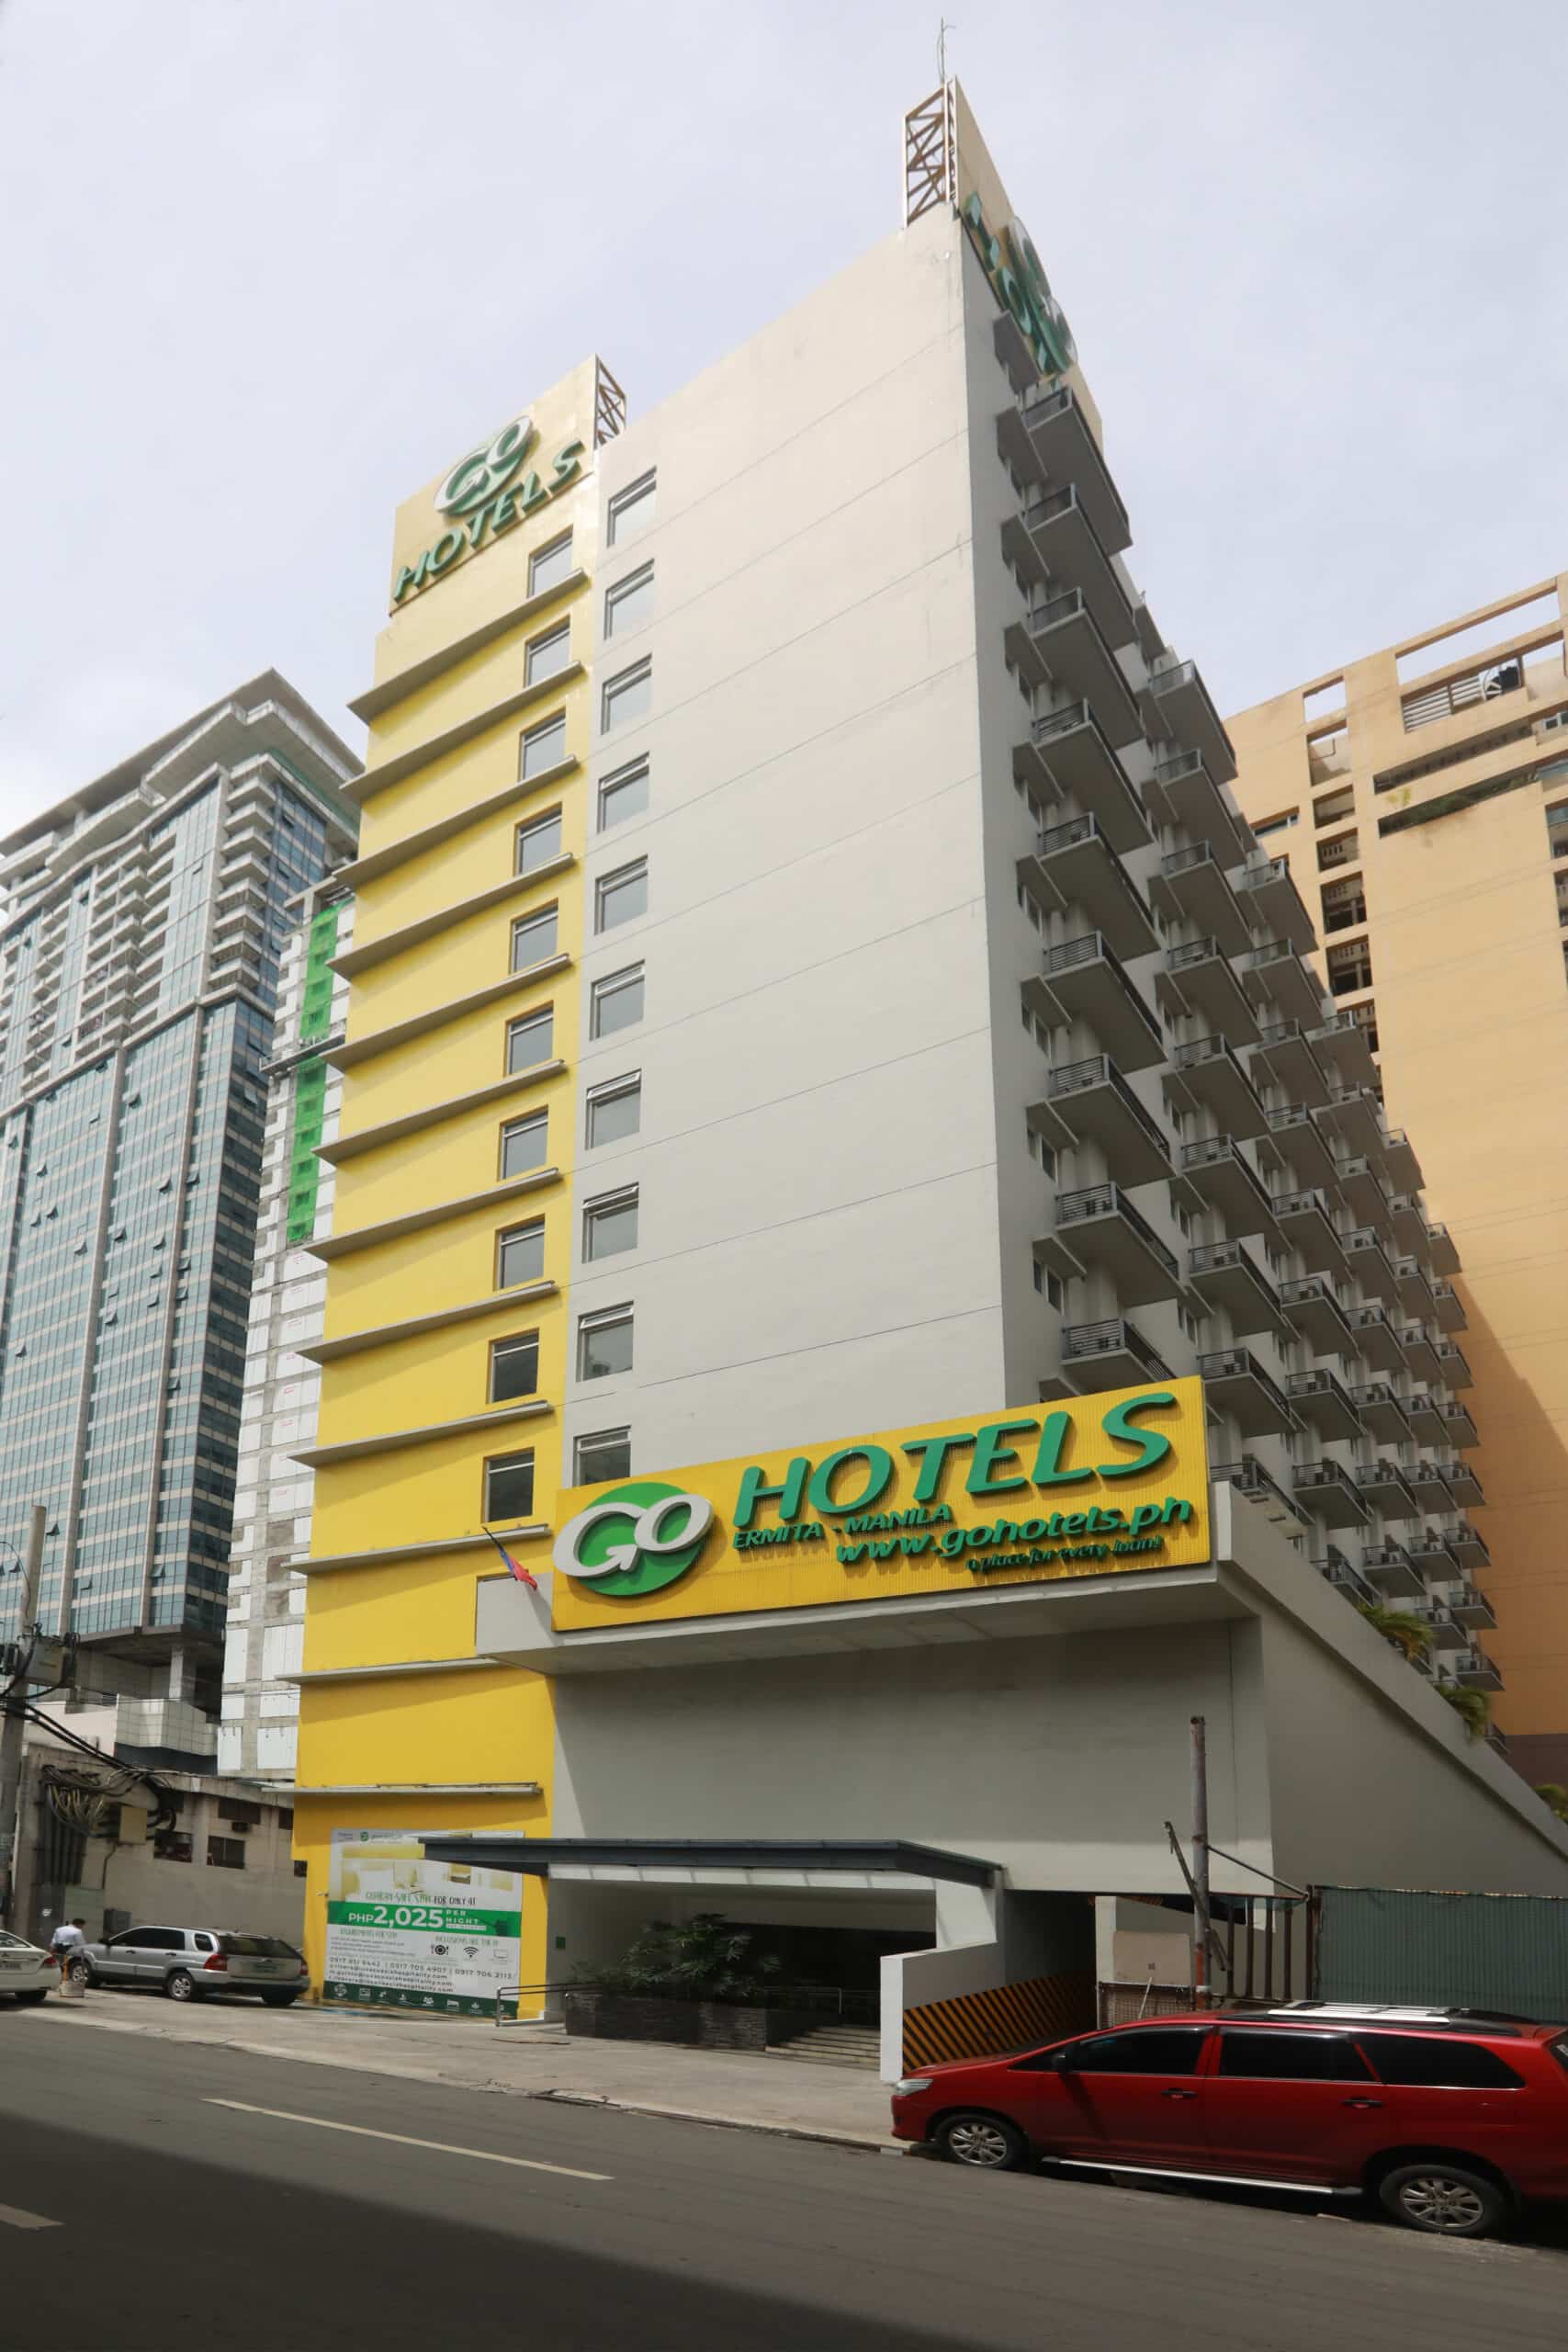 Go Hotels Ermita Manila: Your New Home Away From Home